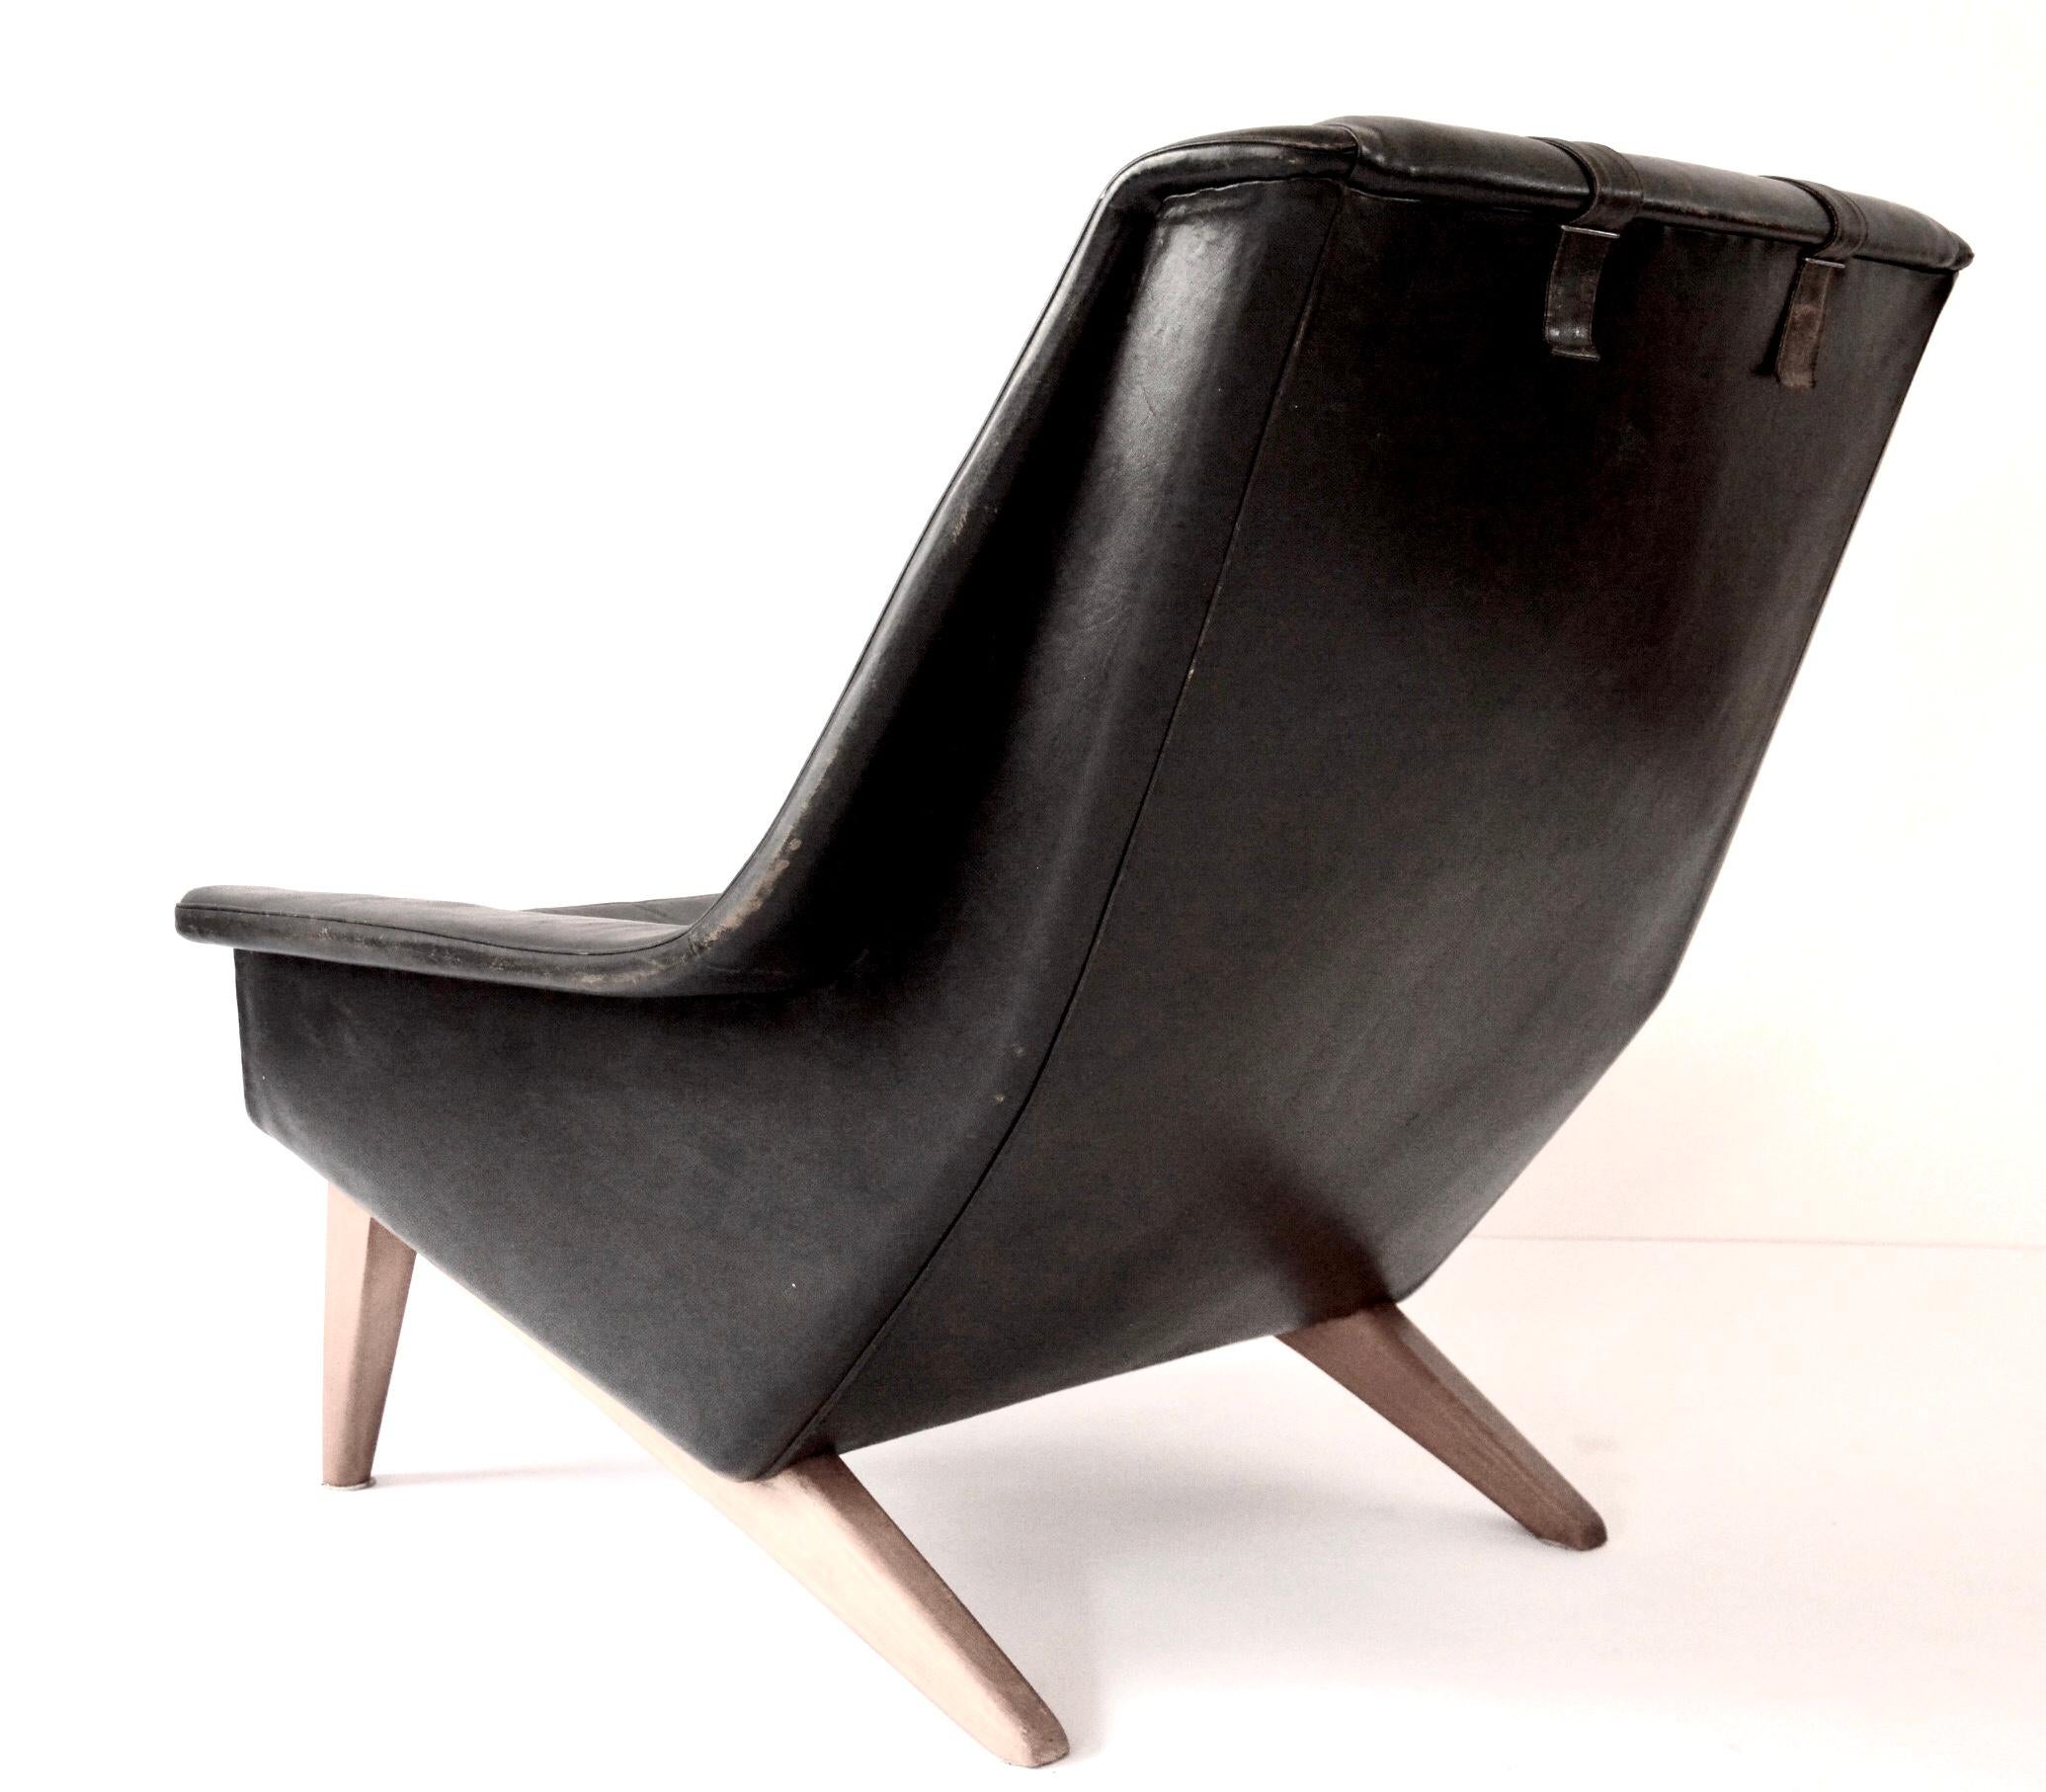 Black Leather Folke Ohlsson Armchair M 4410 Manufactured by Fritz Hansen, 1958 In Good Condition For Sale In Dusseldorf, DE